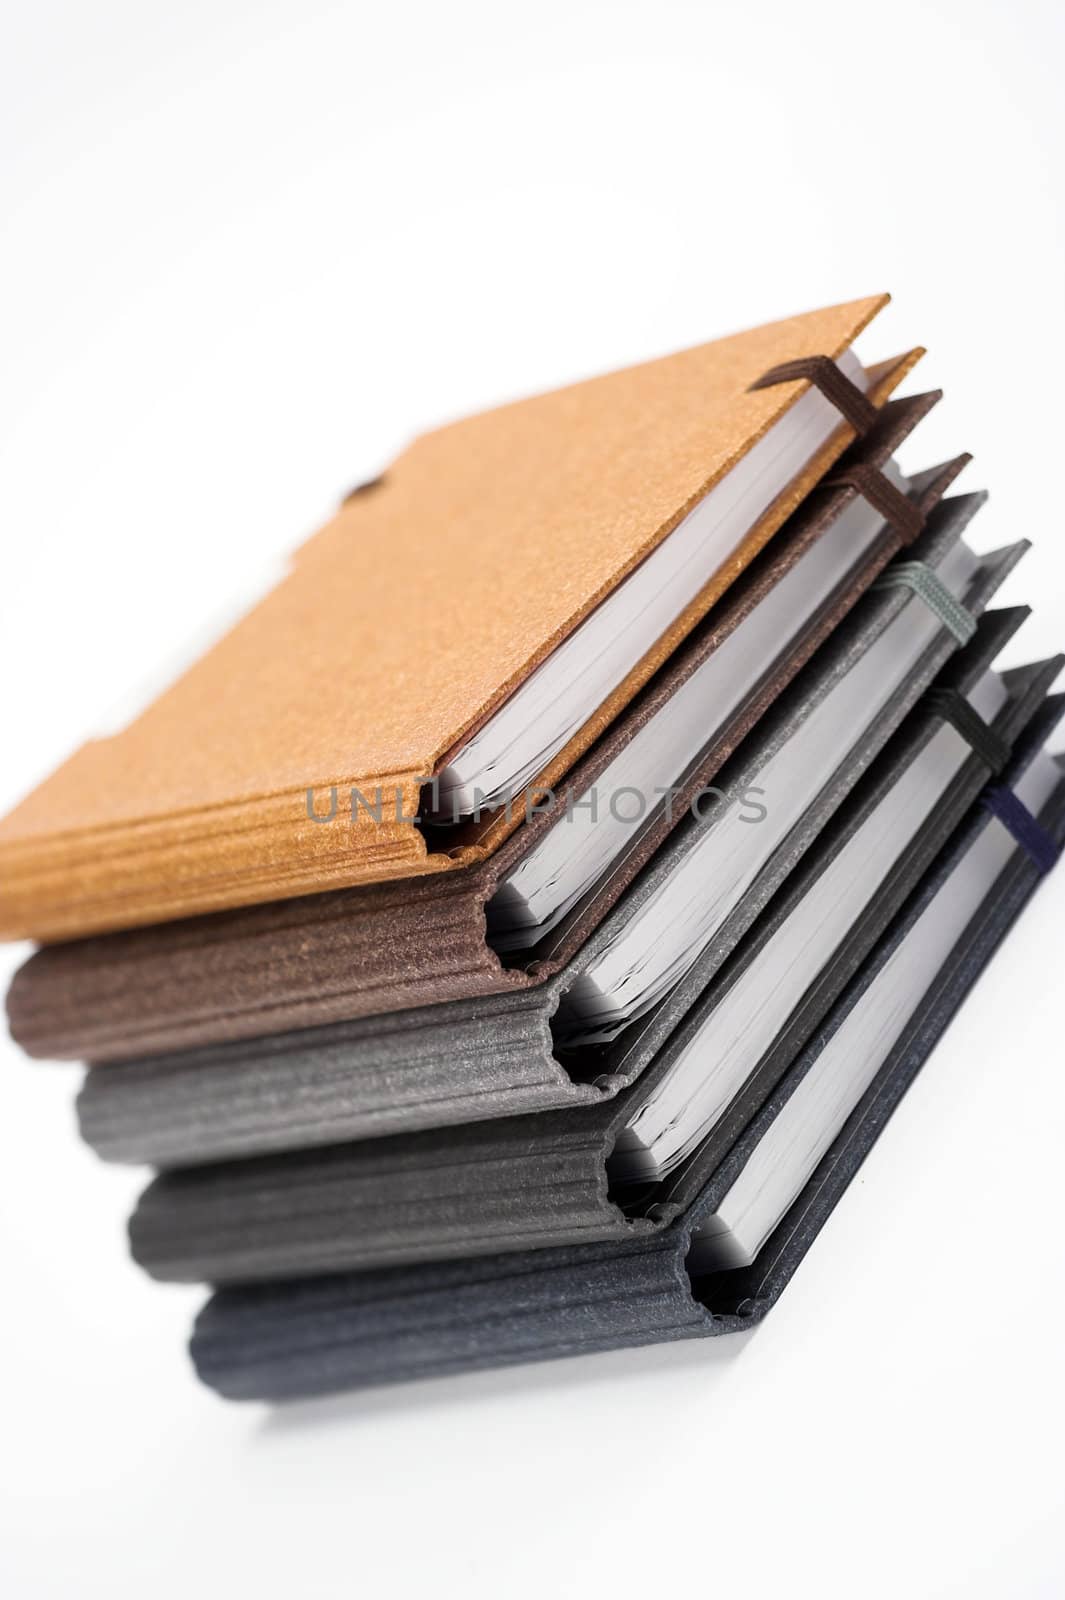 Stack of notebooks  with color cover over white